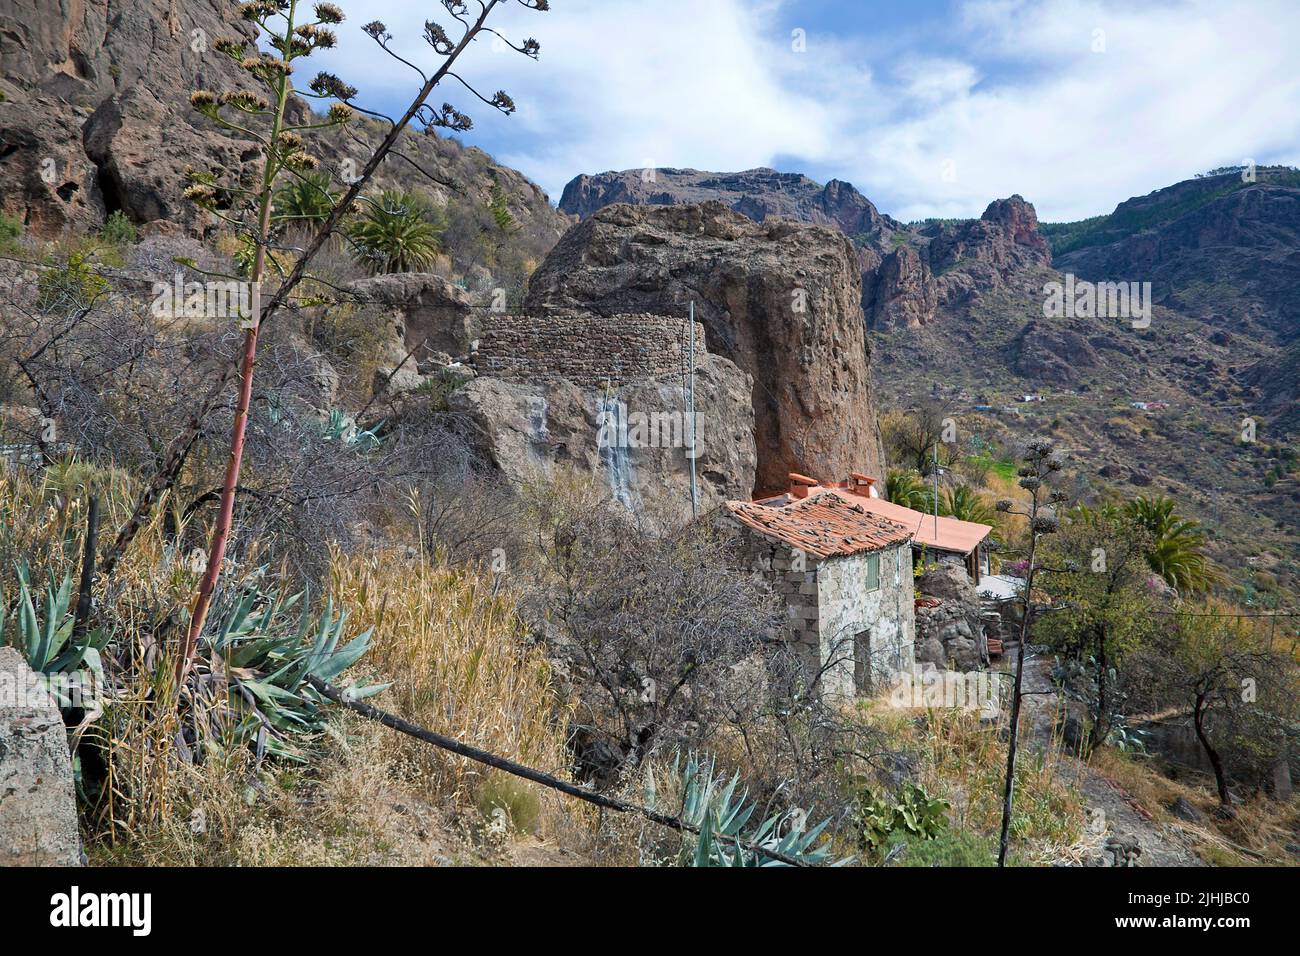 Mountain landscapes at the road GC-605, inland of Grand Canary, Canary islands, Spain, Europe Stock Photo